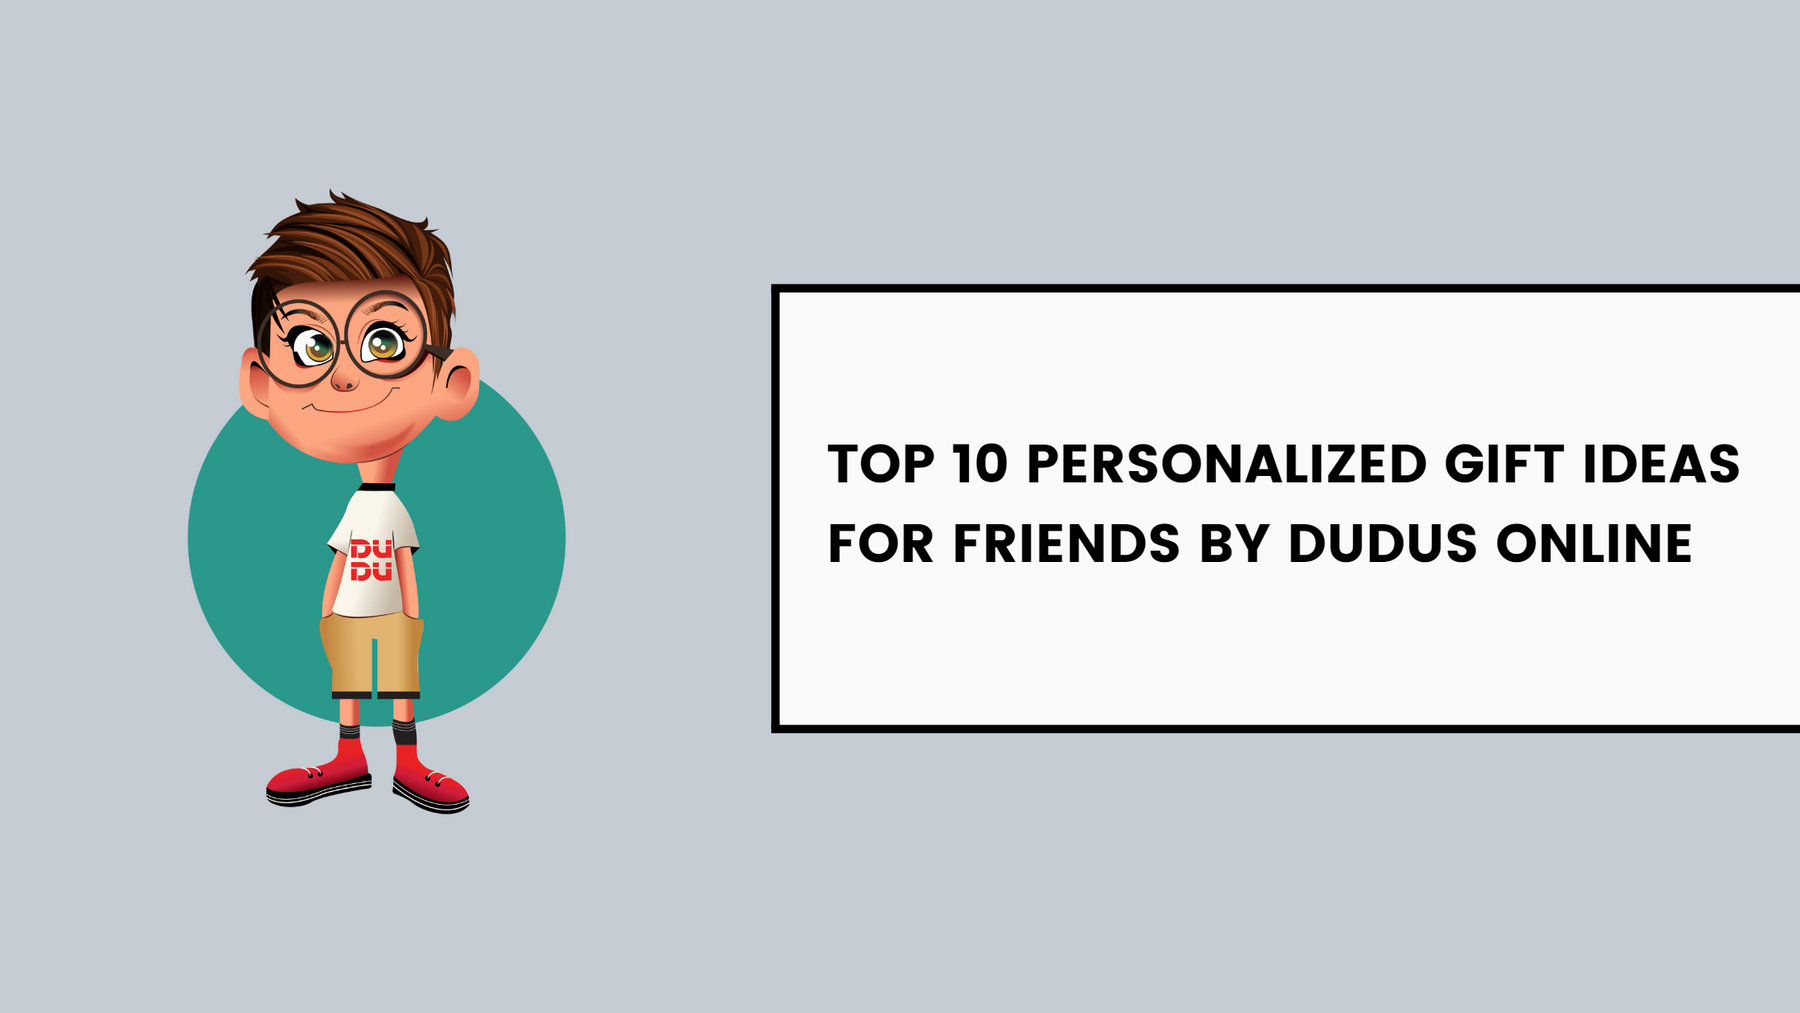 Top 10 Personalized Gift Ideas For Friends By Dudus Online